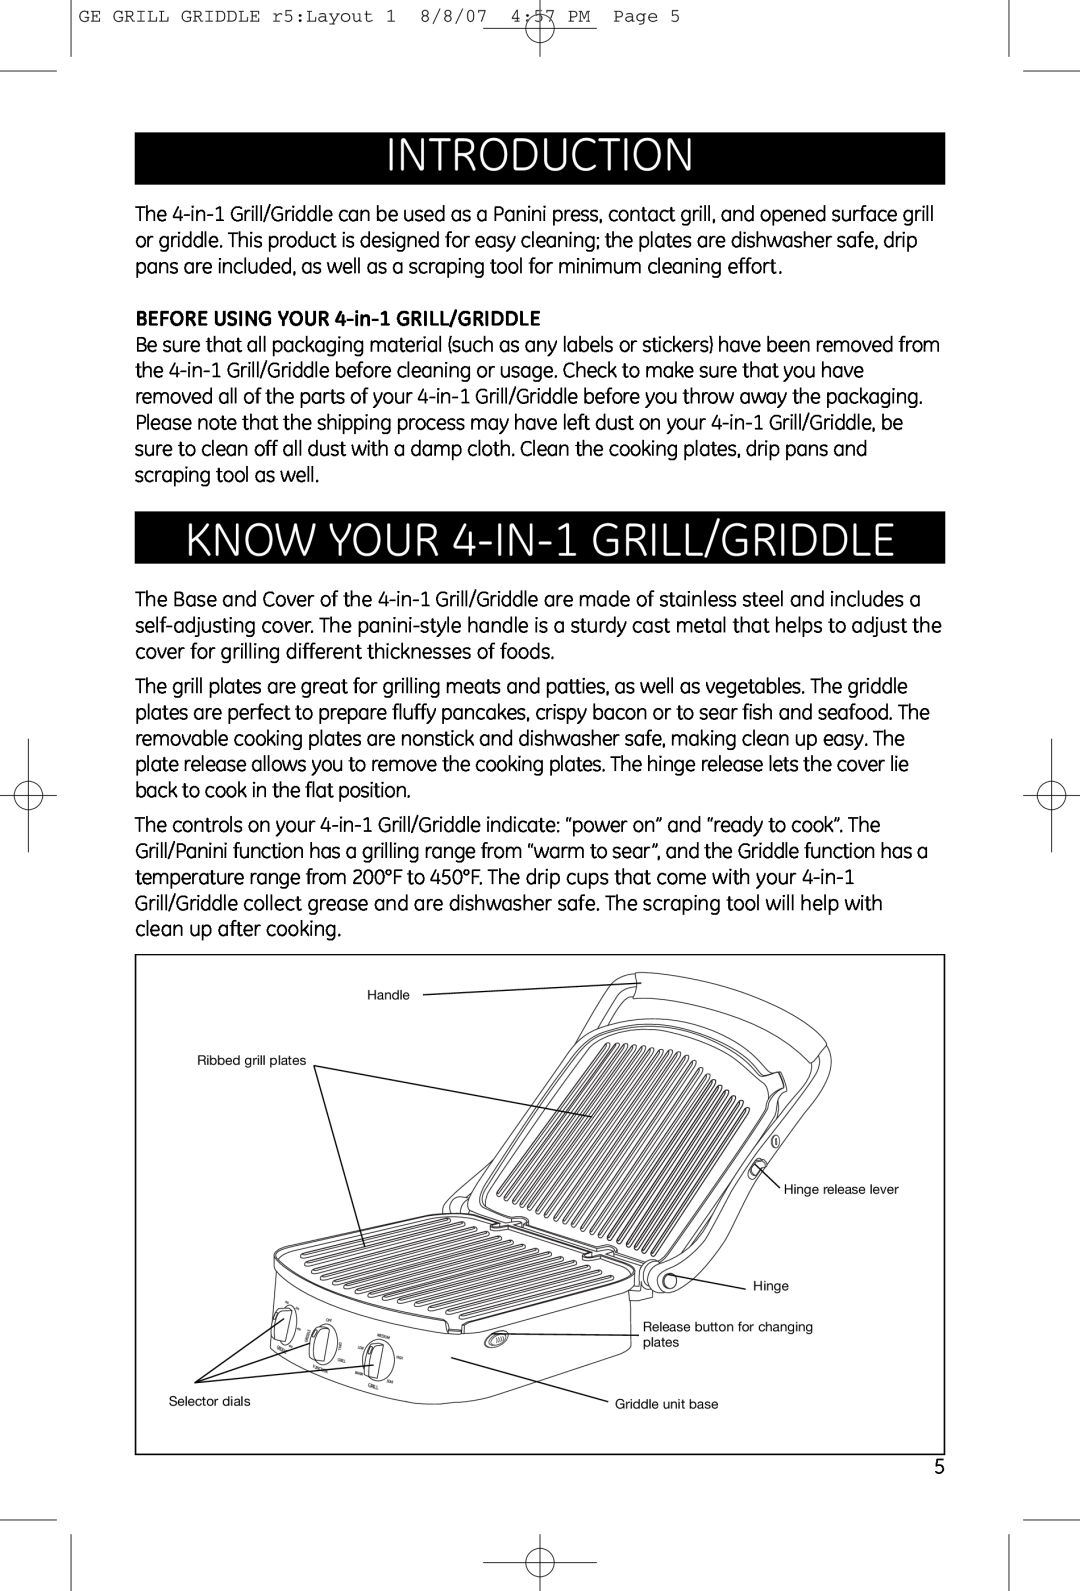 GE 681131691482 manual Introduction, KNOW YOUR 4-IN-1GRILL/GRIDDLE, BEFORE USING YOUR 4-in-1GRILL/GRIDDLE 